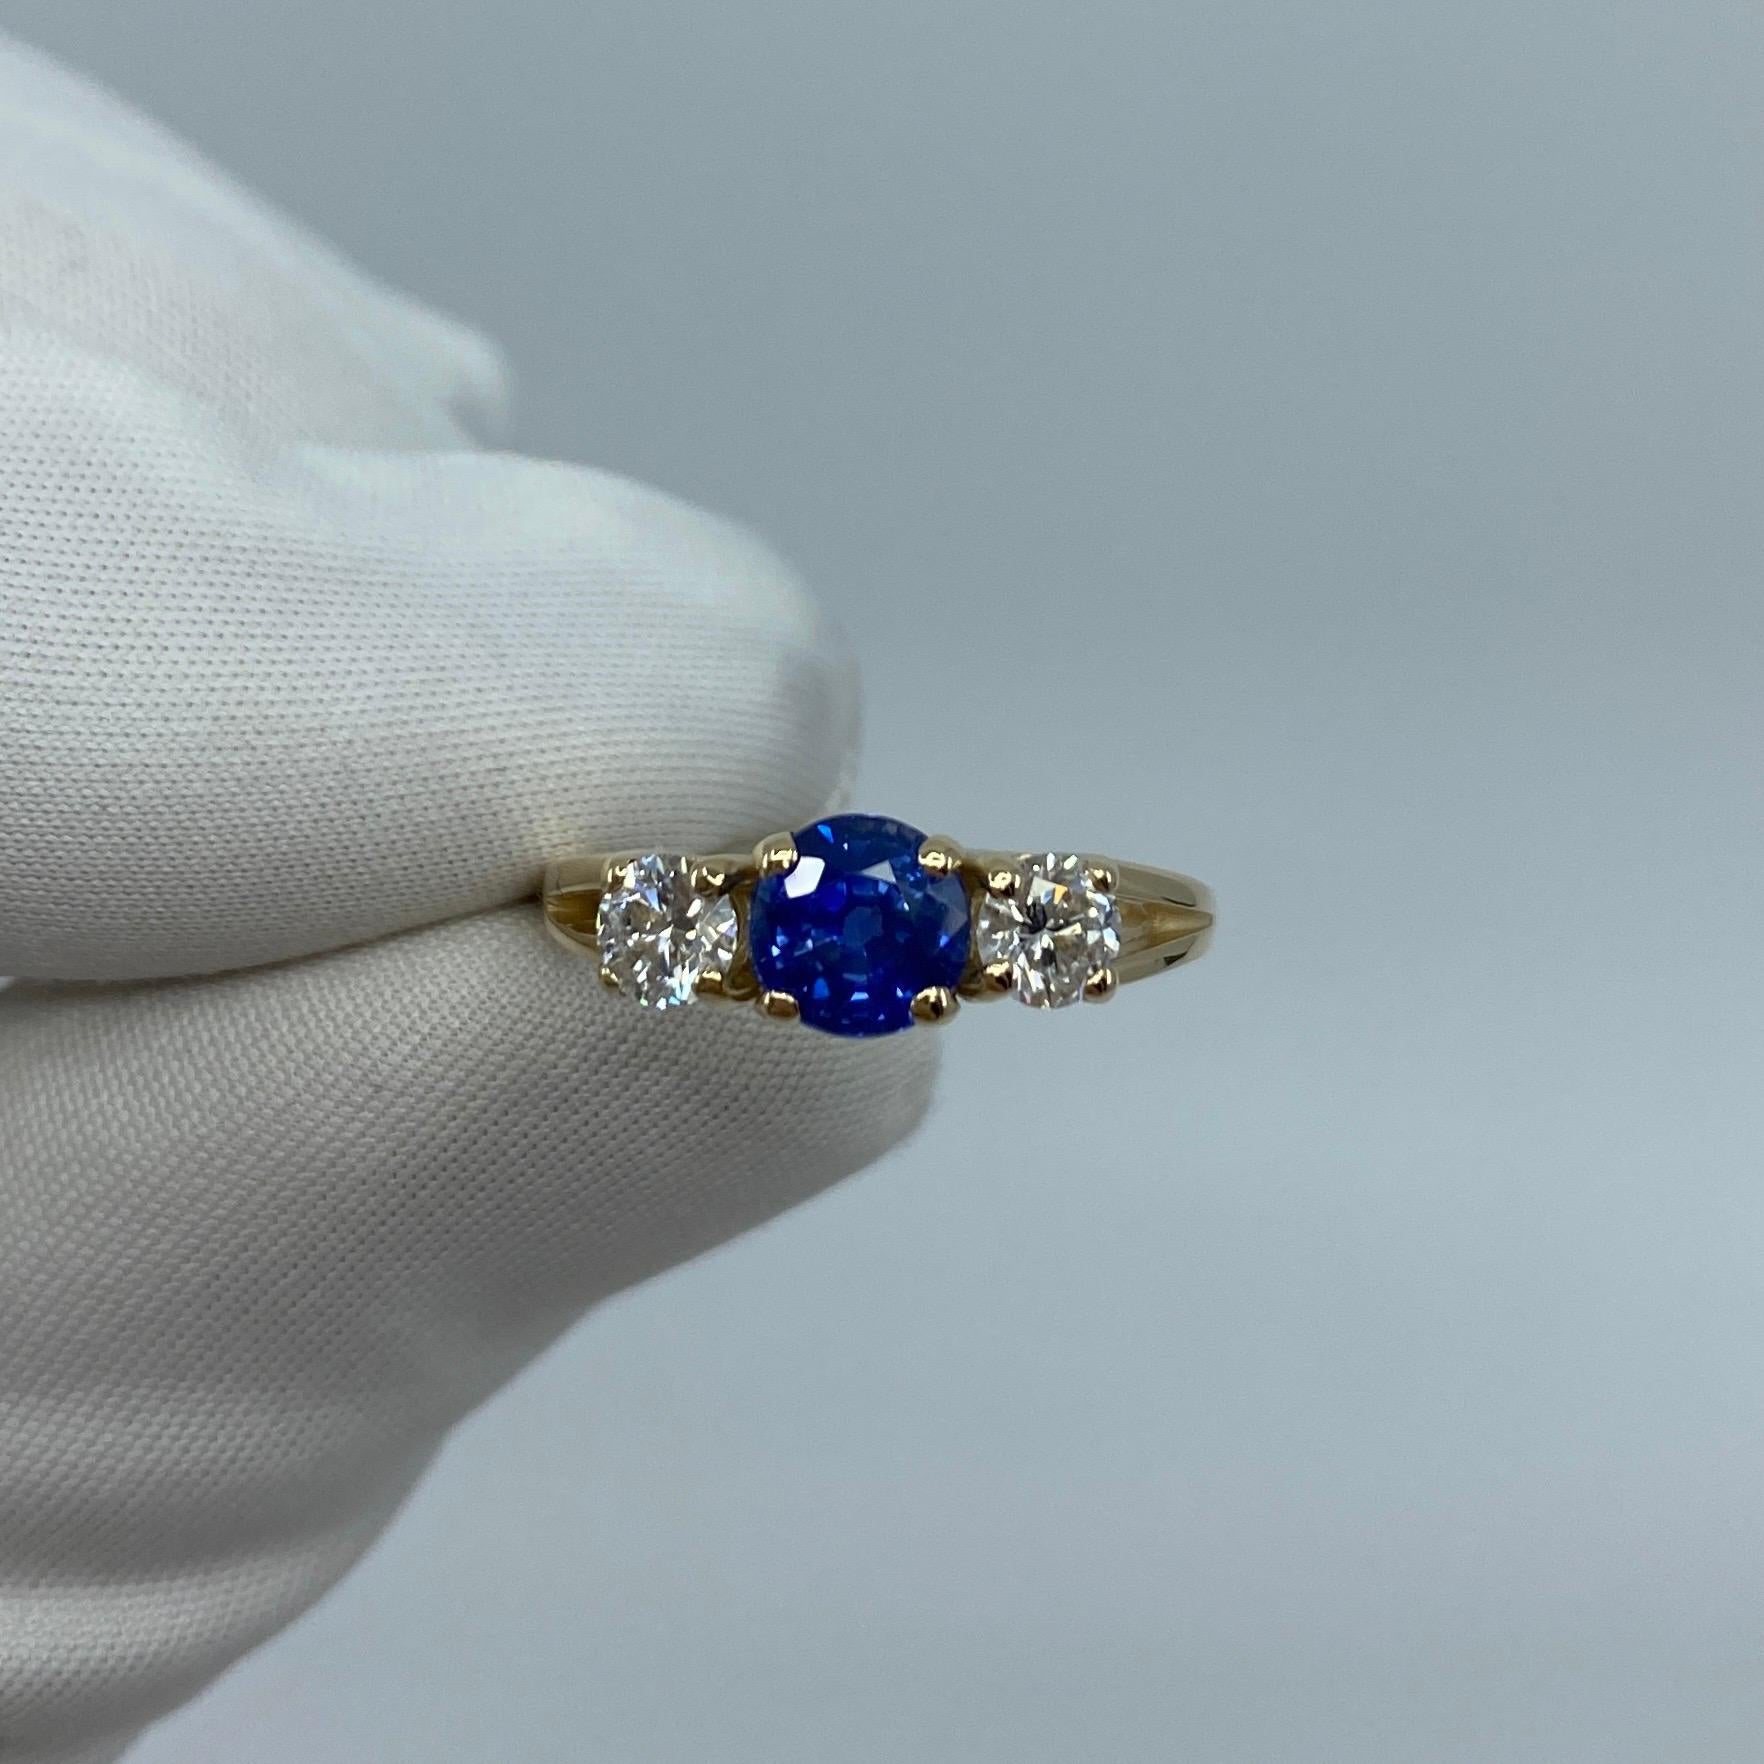 Fine Vivid Cornflower Blue Ceylon Sapphire & Diamond 14k Yellow Gold Three Stone Ring.

1.50 Carat centre sapphire with a fine quality vivid cornflower blue colour and very good clarity, a very clean stone with only some small natural inclusions